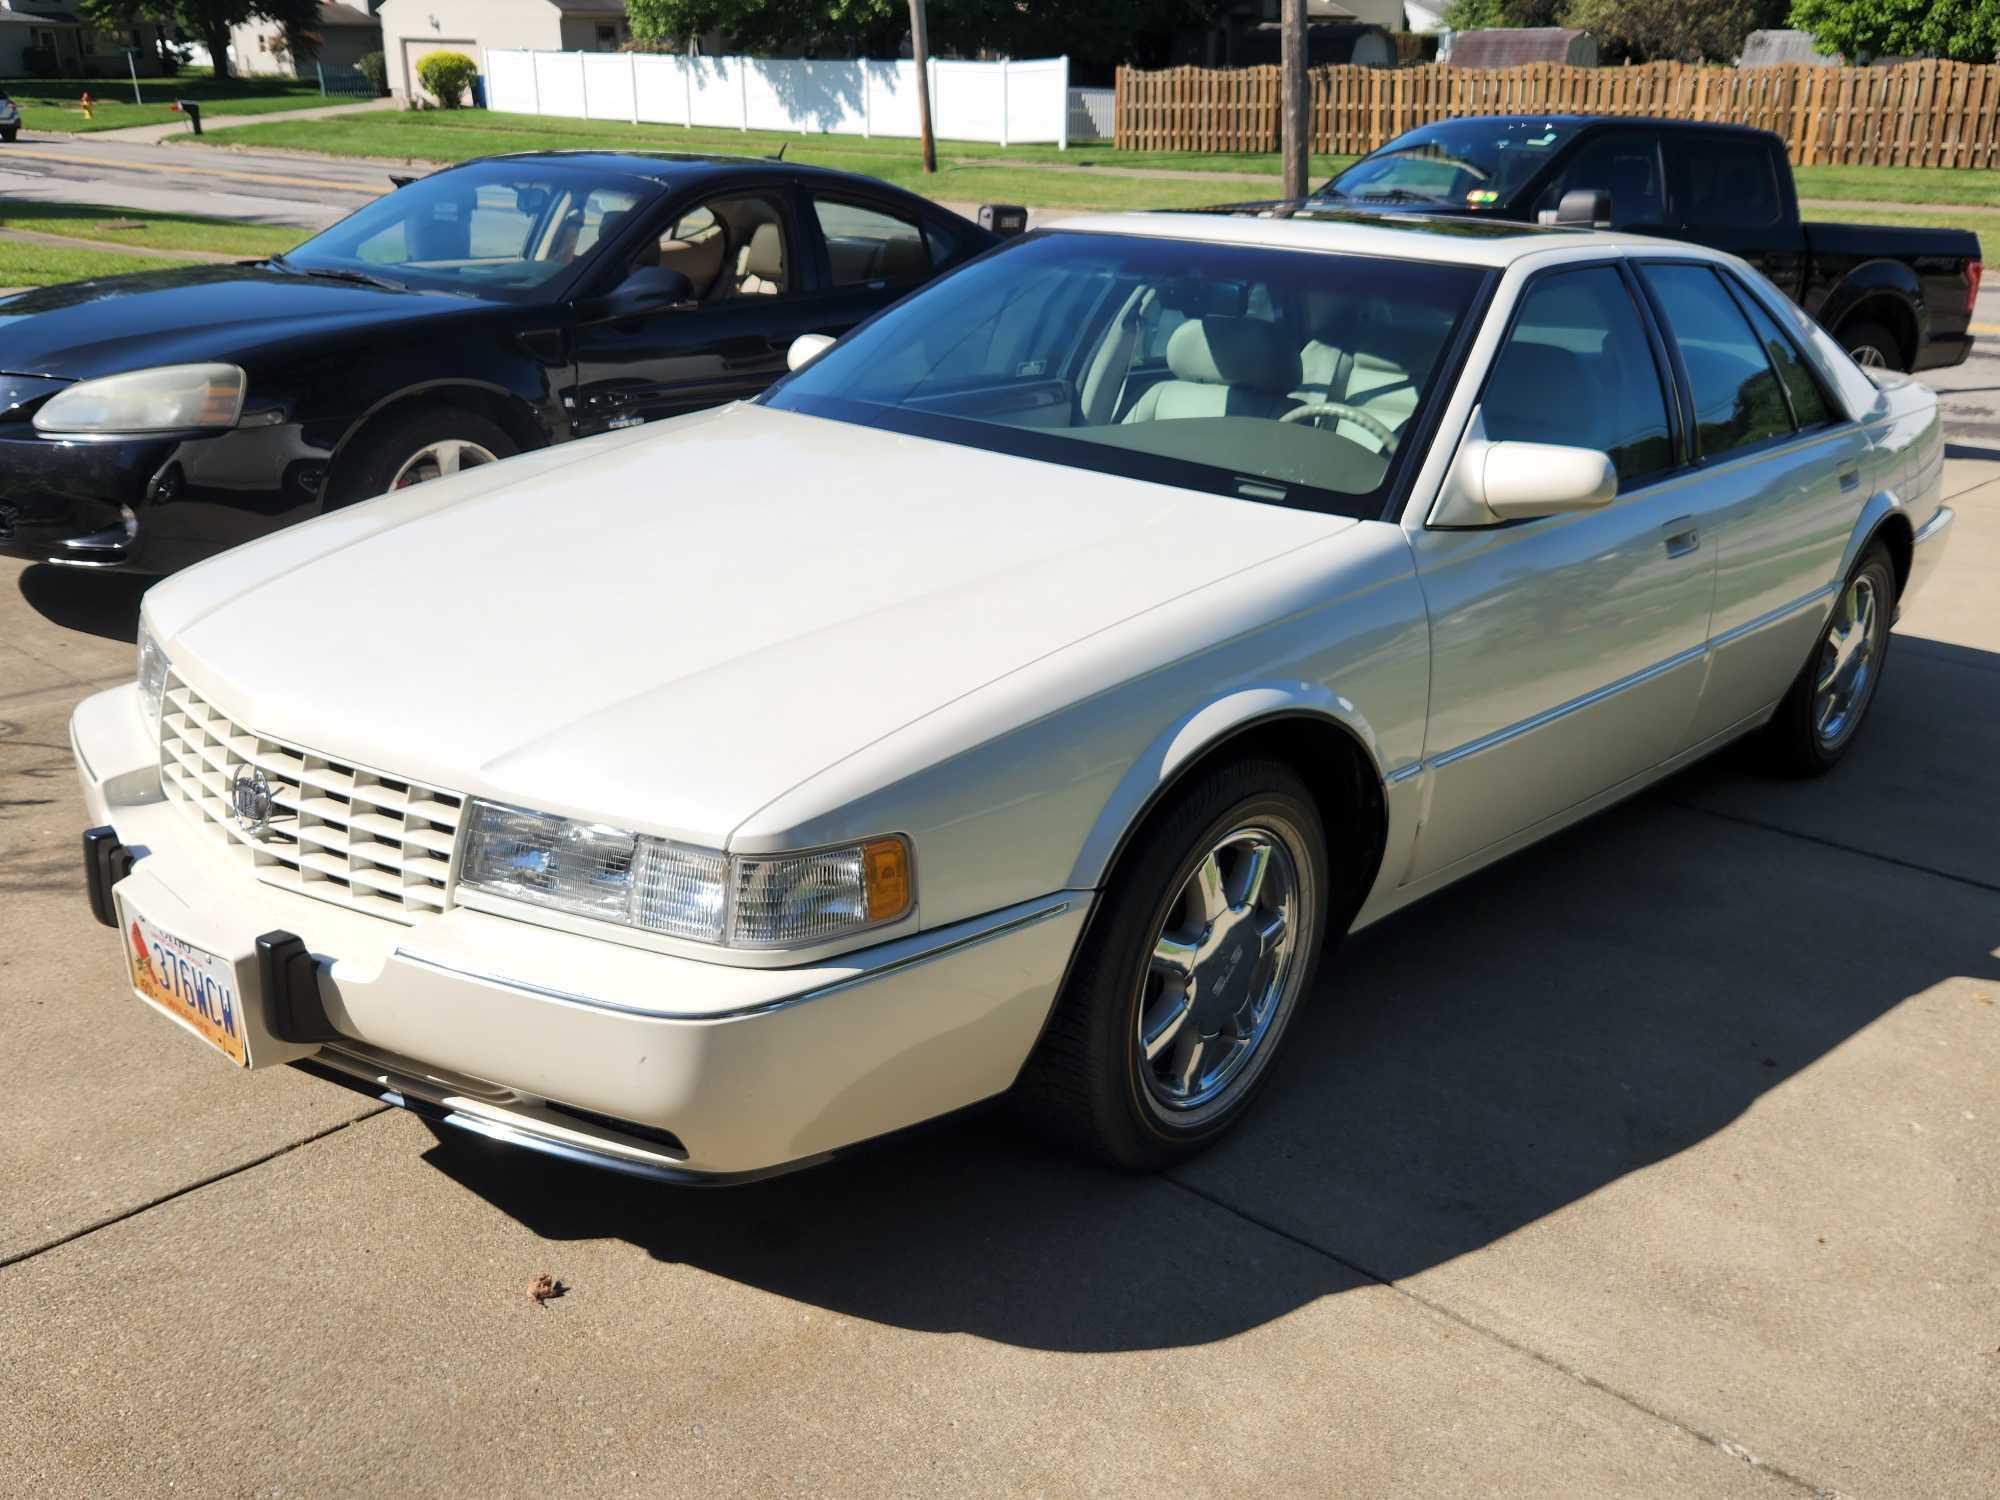 1997 Cadillac Seville STS, ONLY 14,163 miles. Super clean car. Rare Find!!